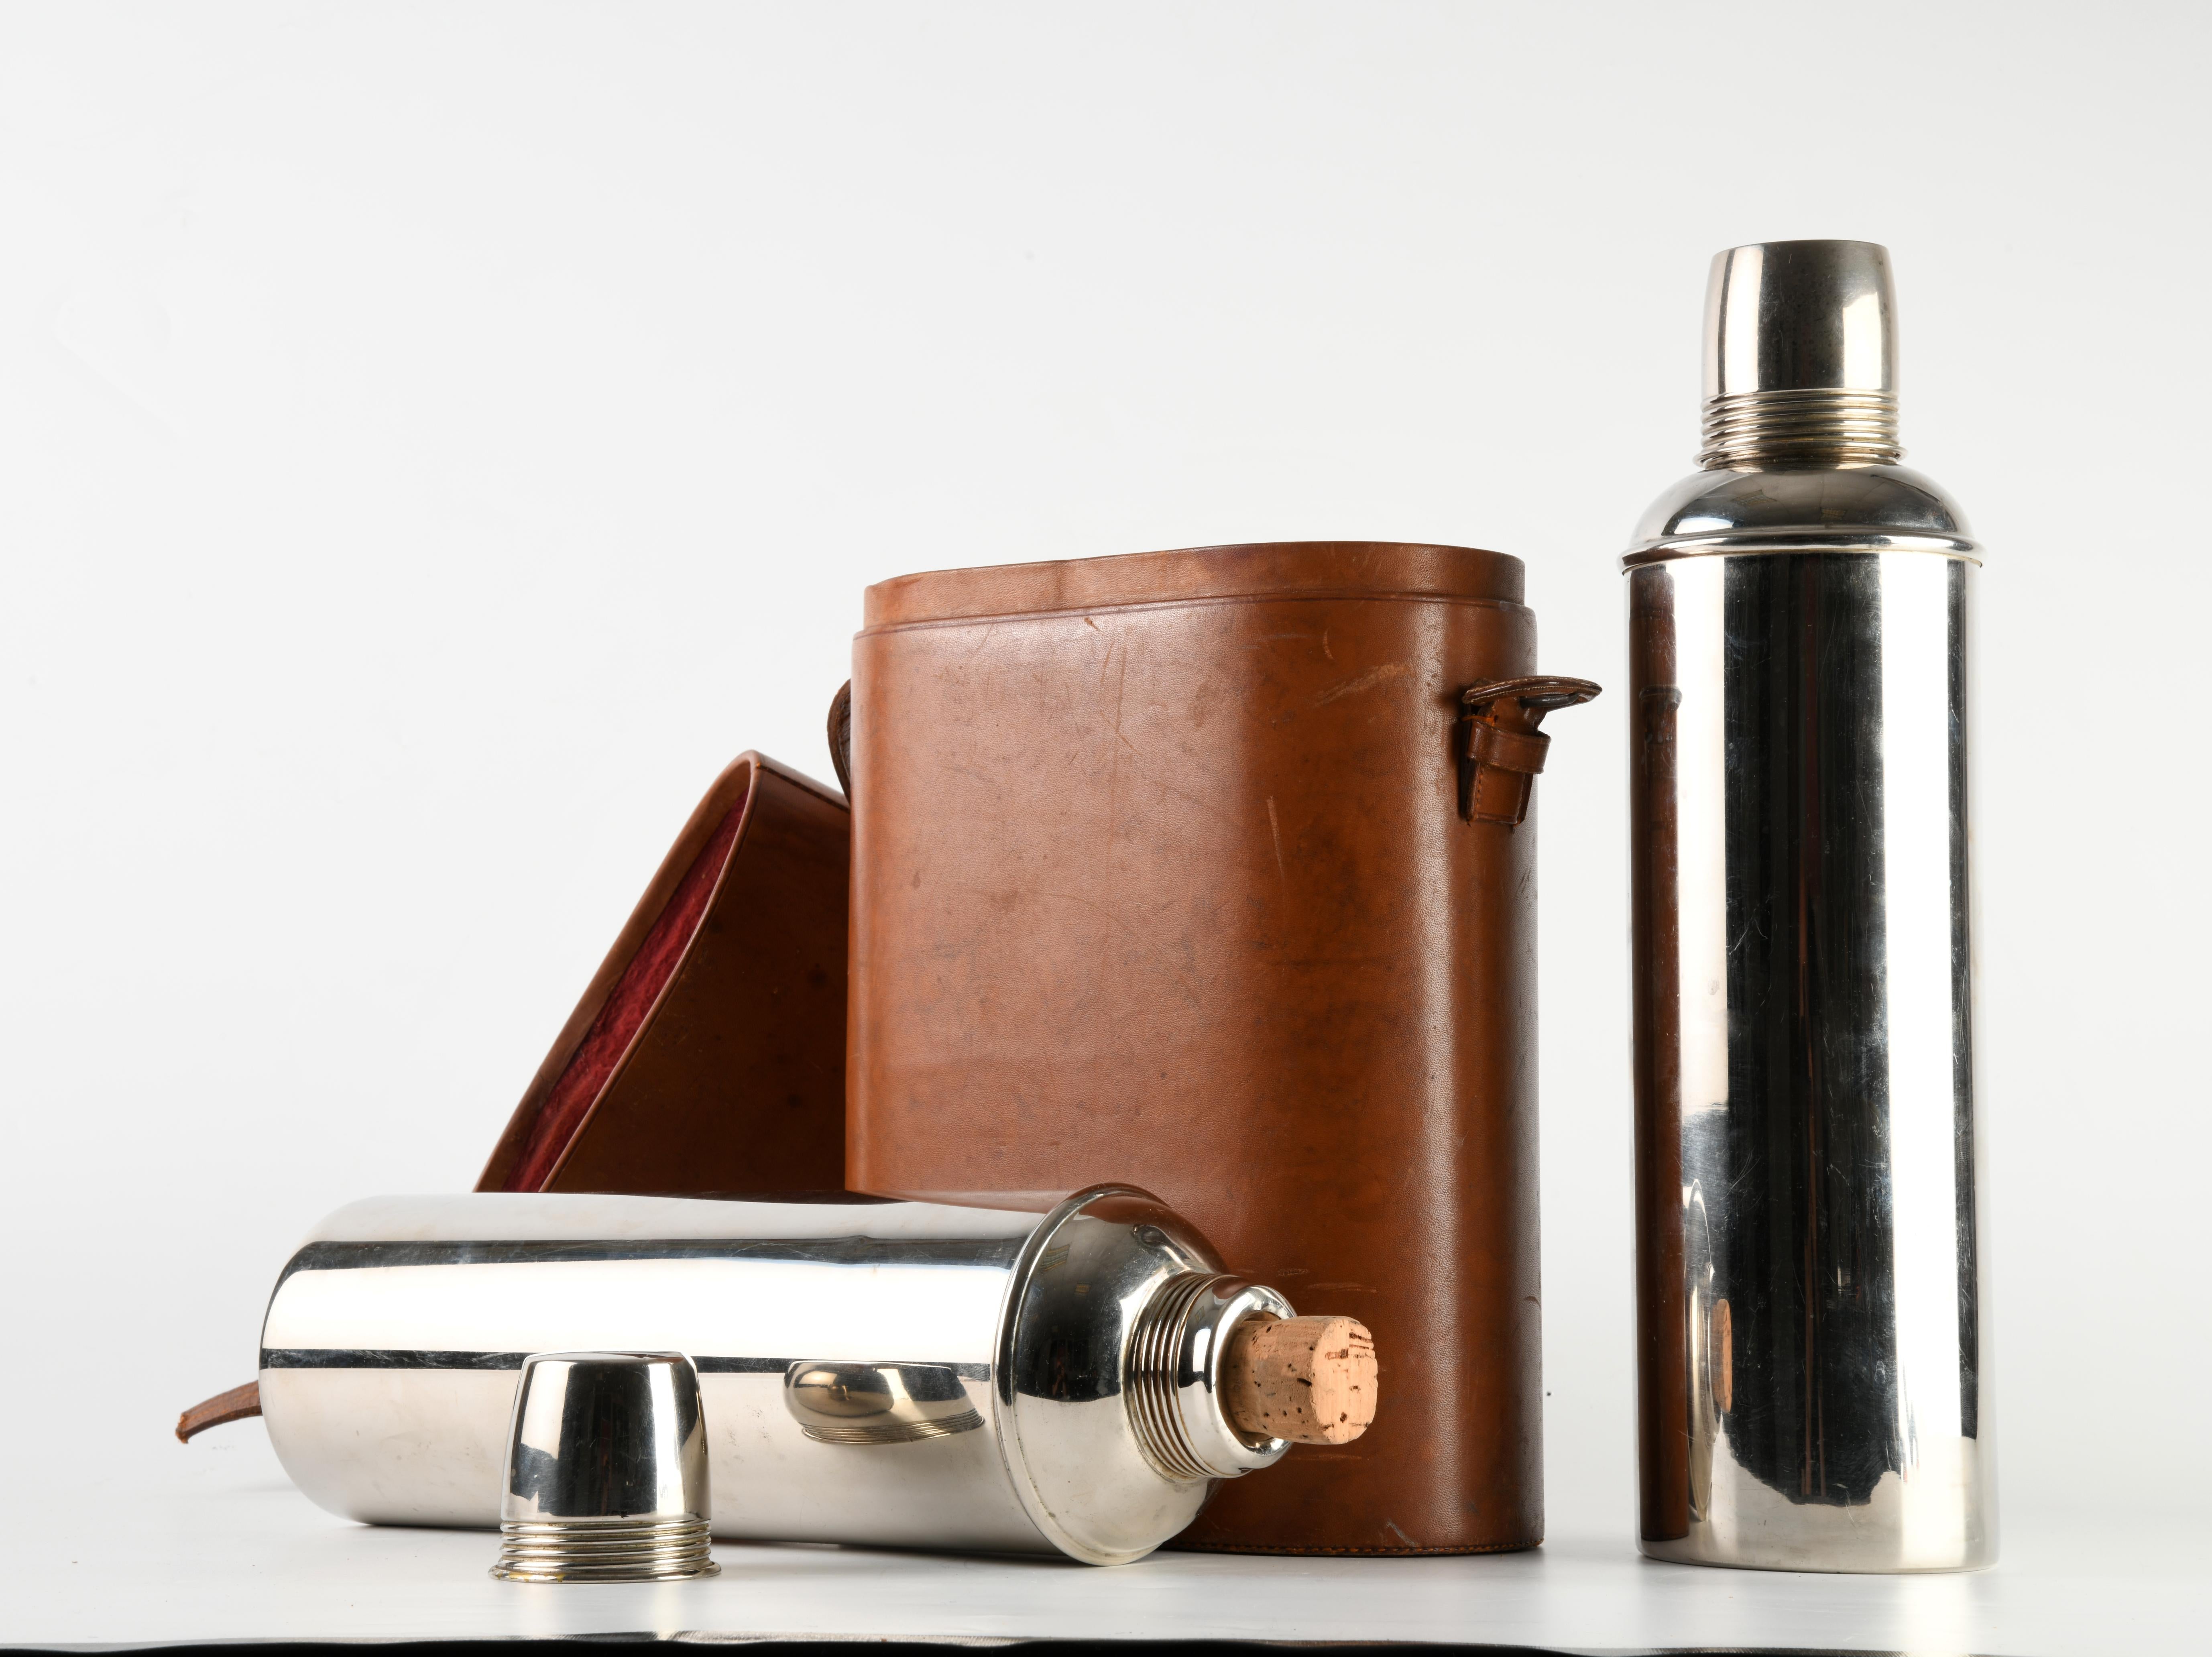 Set of two chrome-plated steel Thermos flasks from the eponymous brand, circa 1930/40. Housed in a velvet-lined leather case with glass interior, closed with cork stoppers and screw-on lids. A difference between the two lids makes it possible to